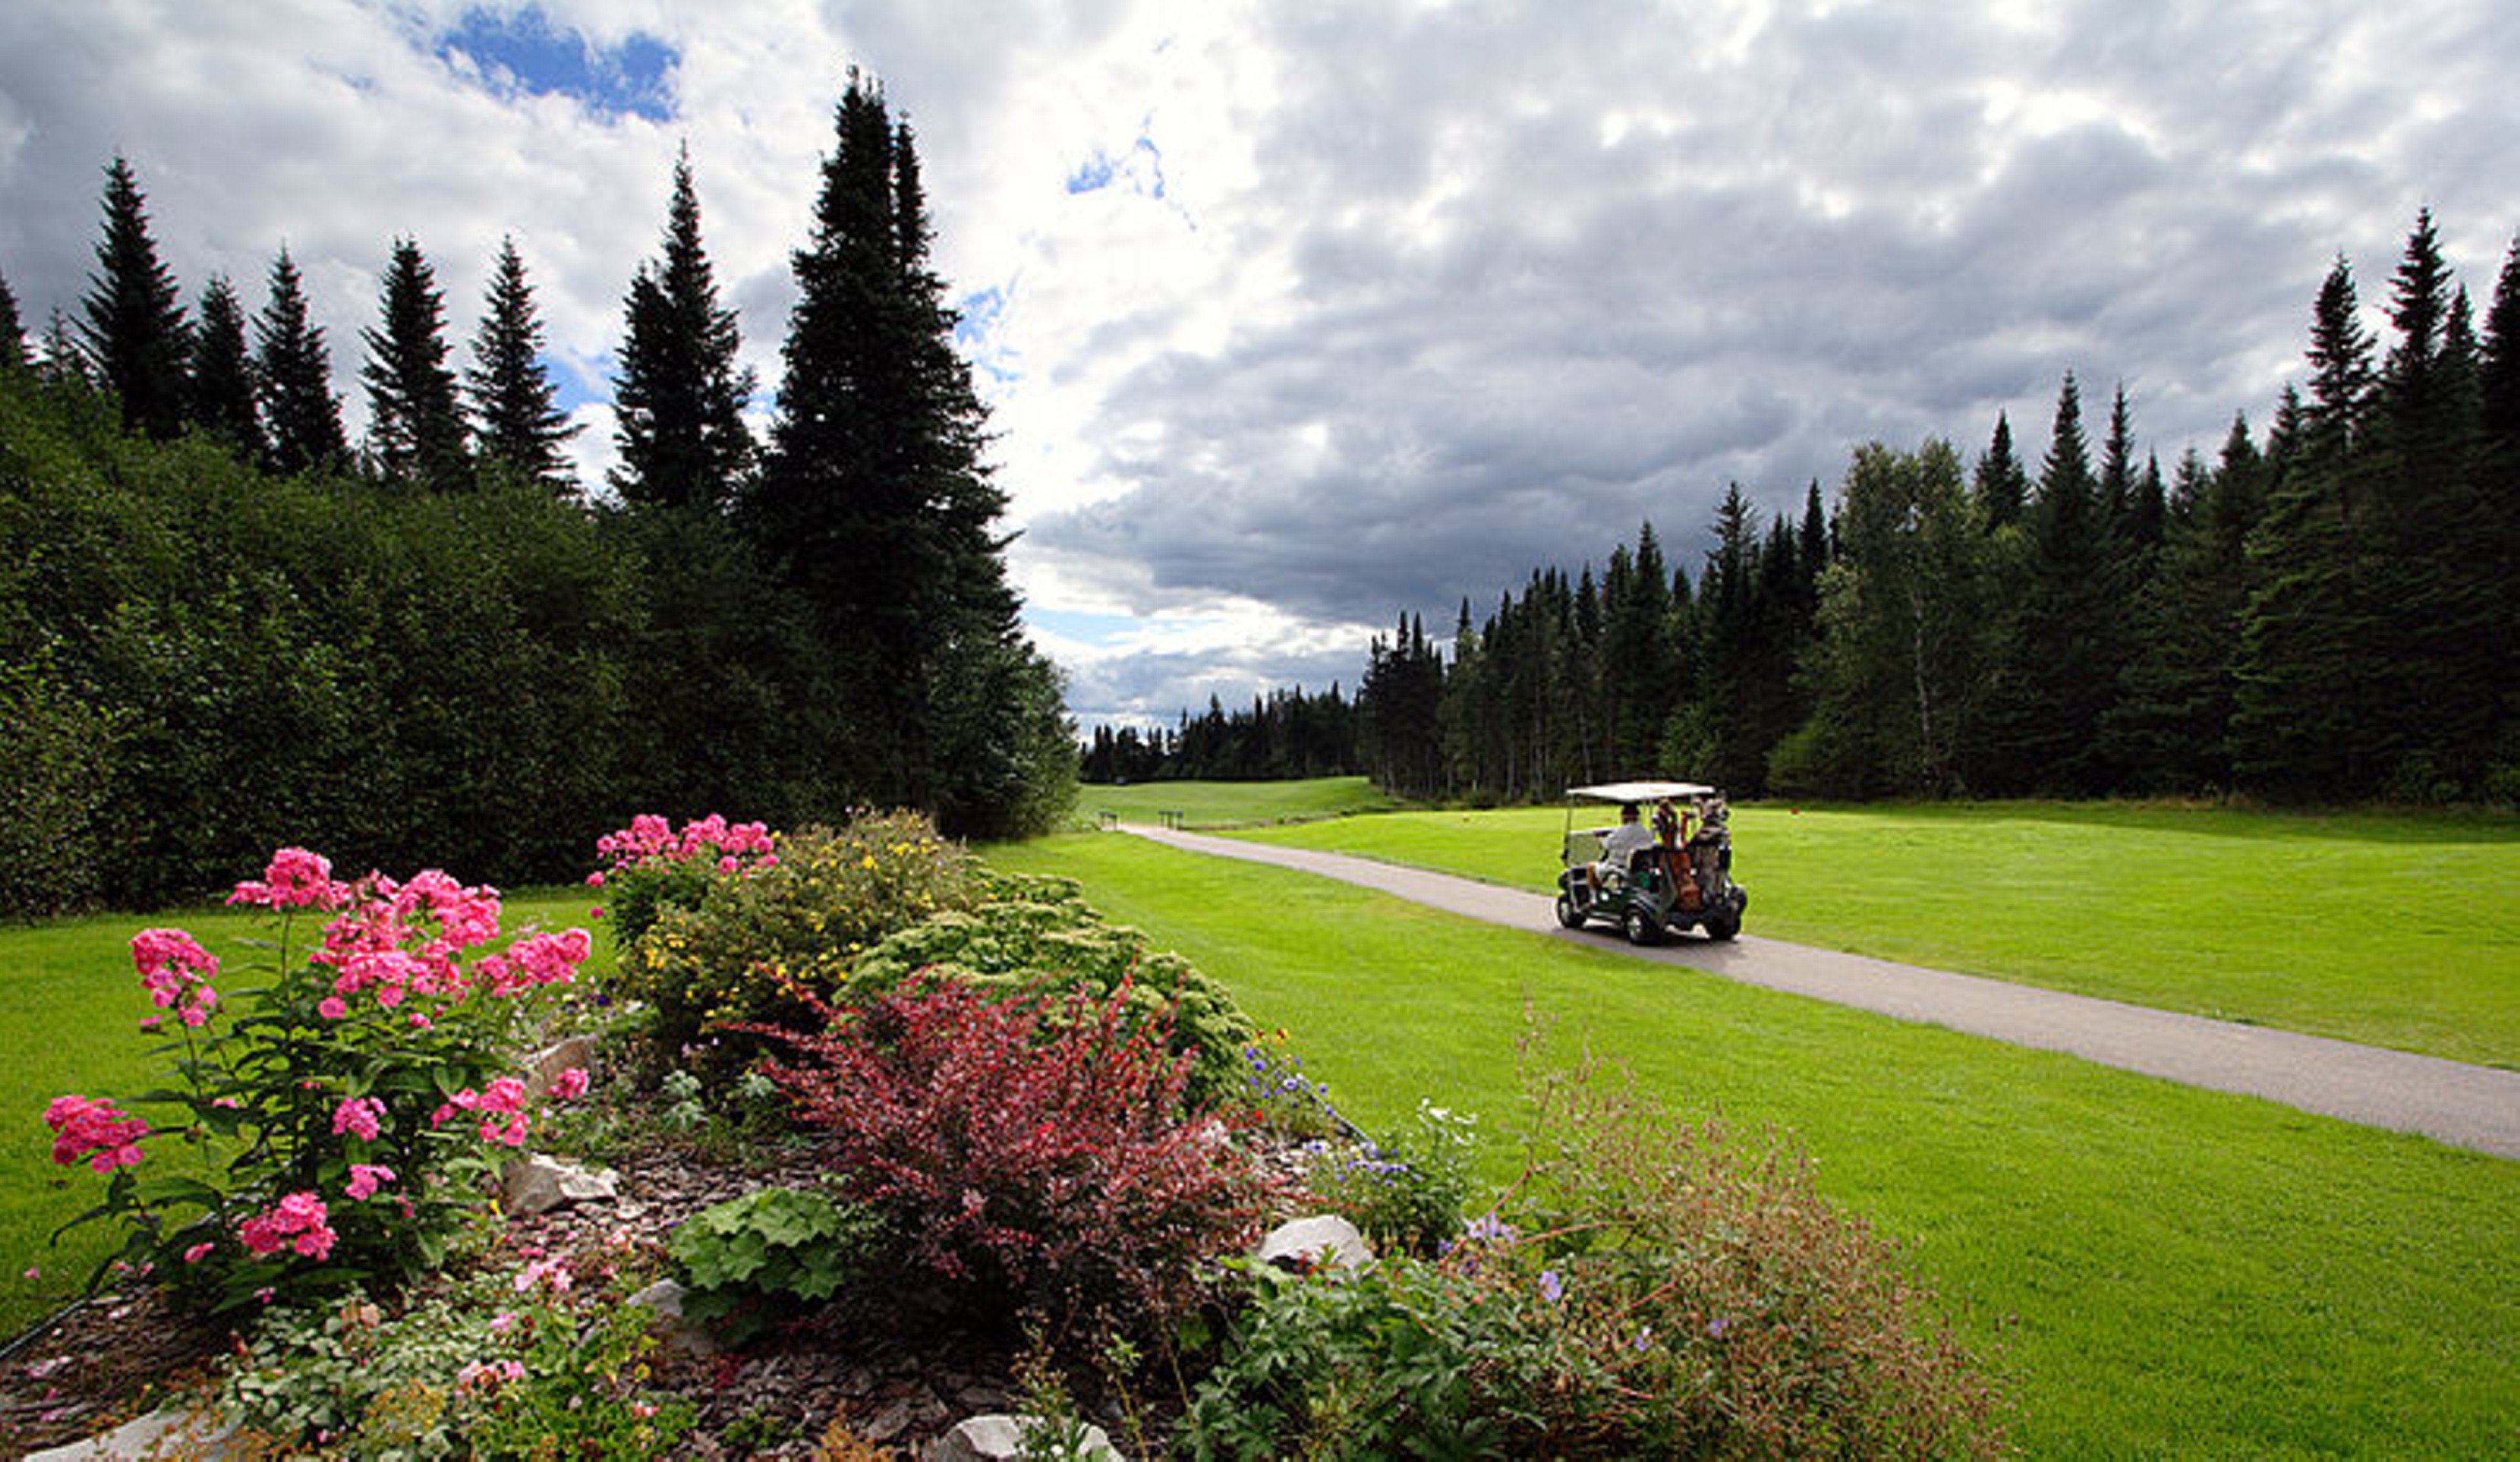 Humber River Golf Club Credit to NL Tourism